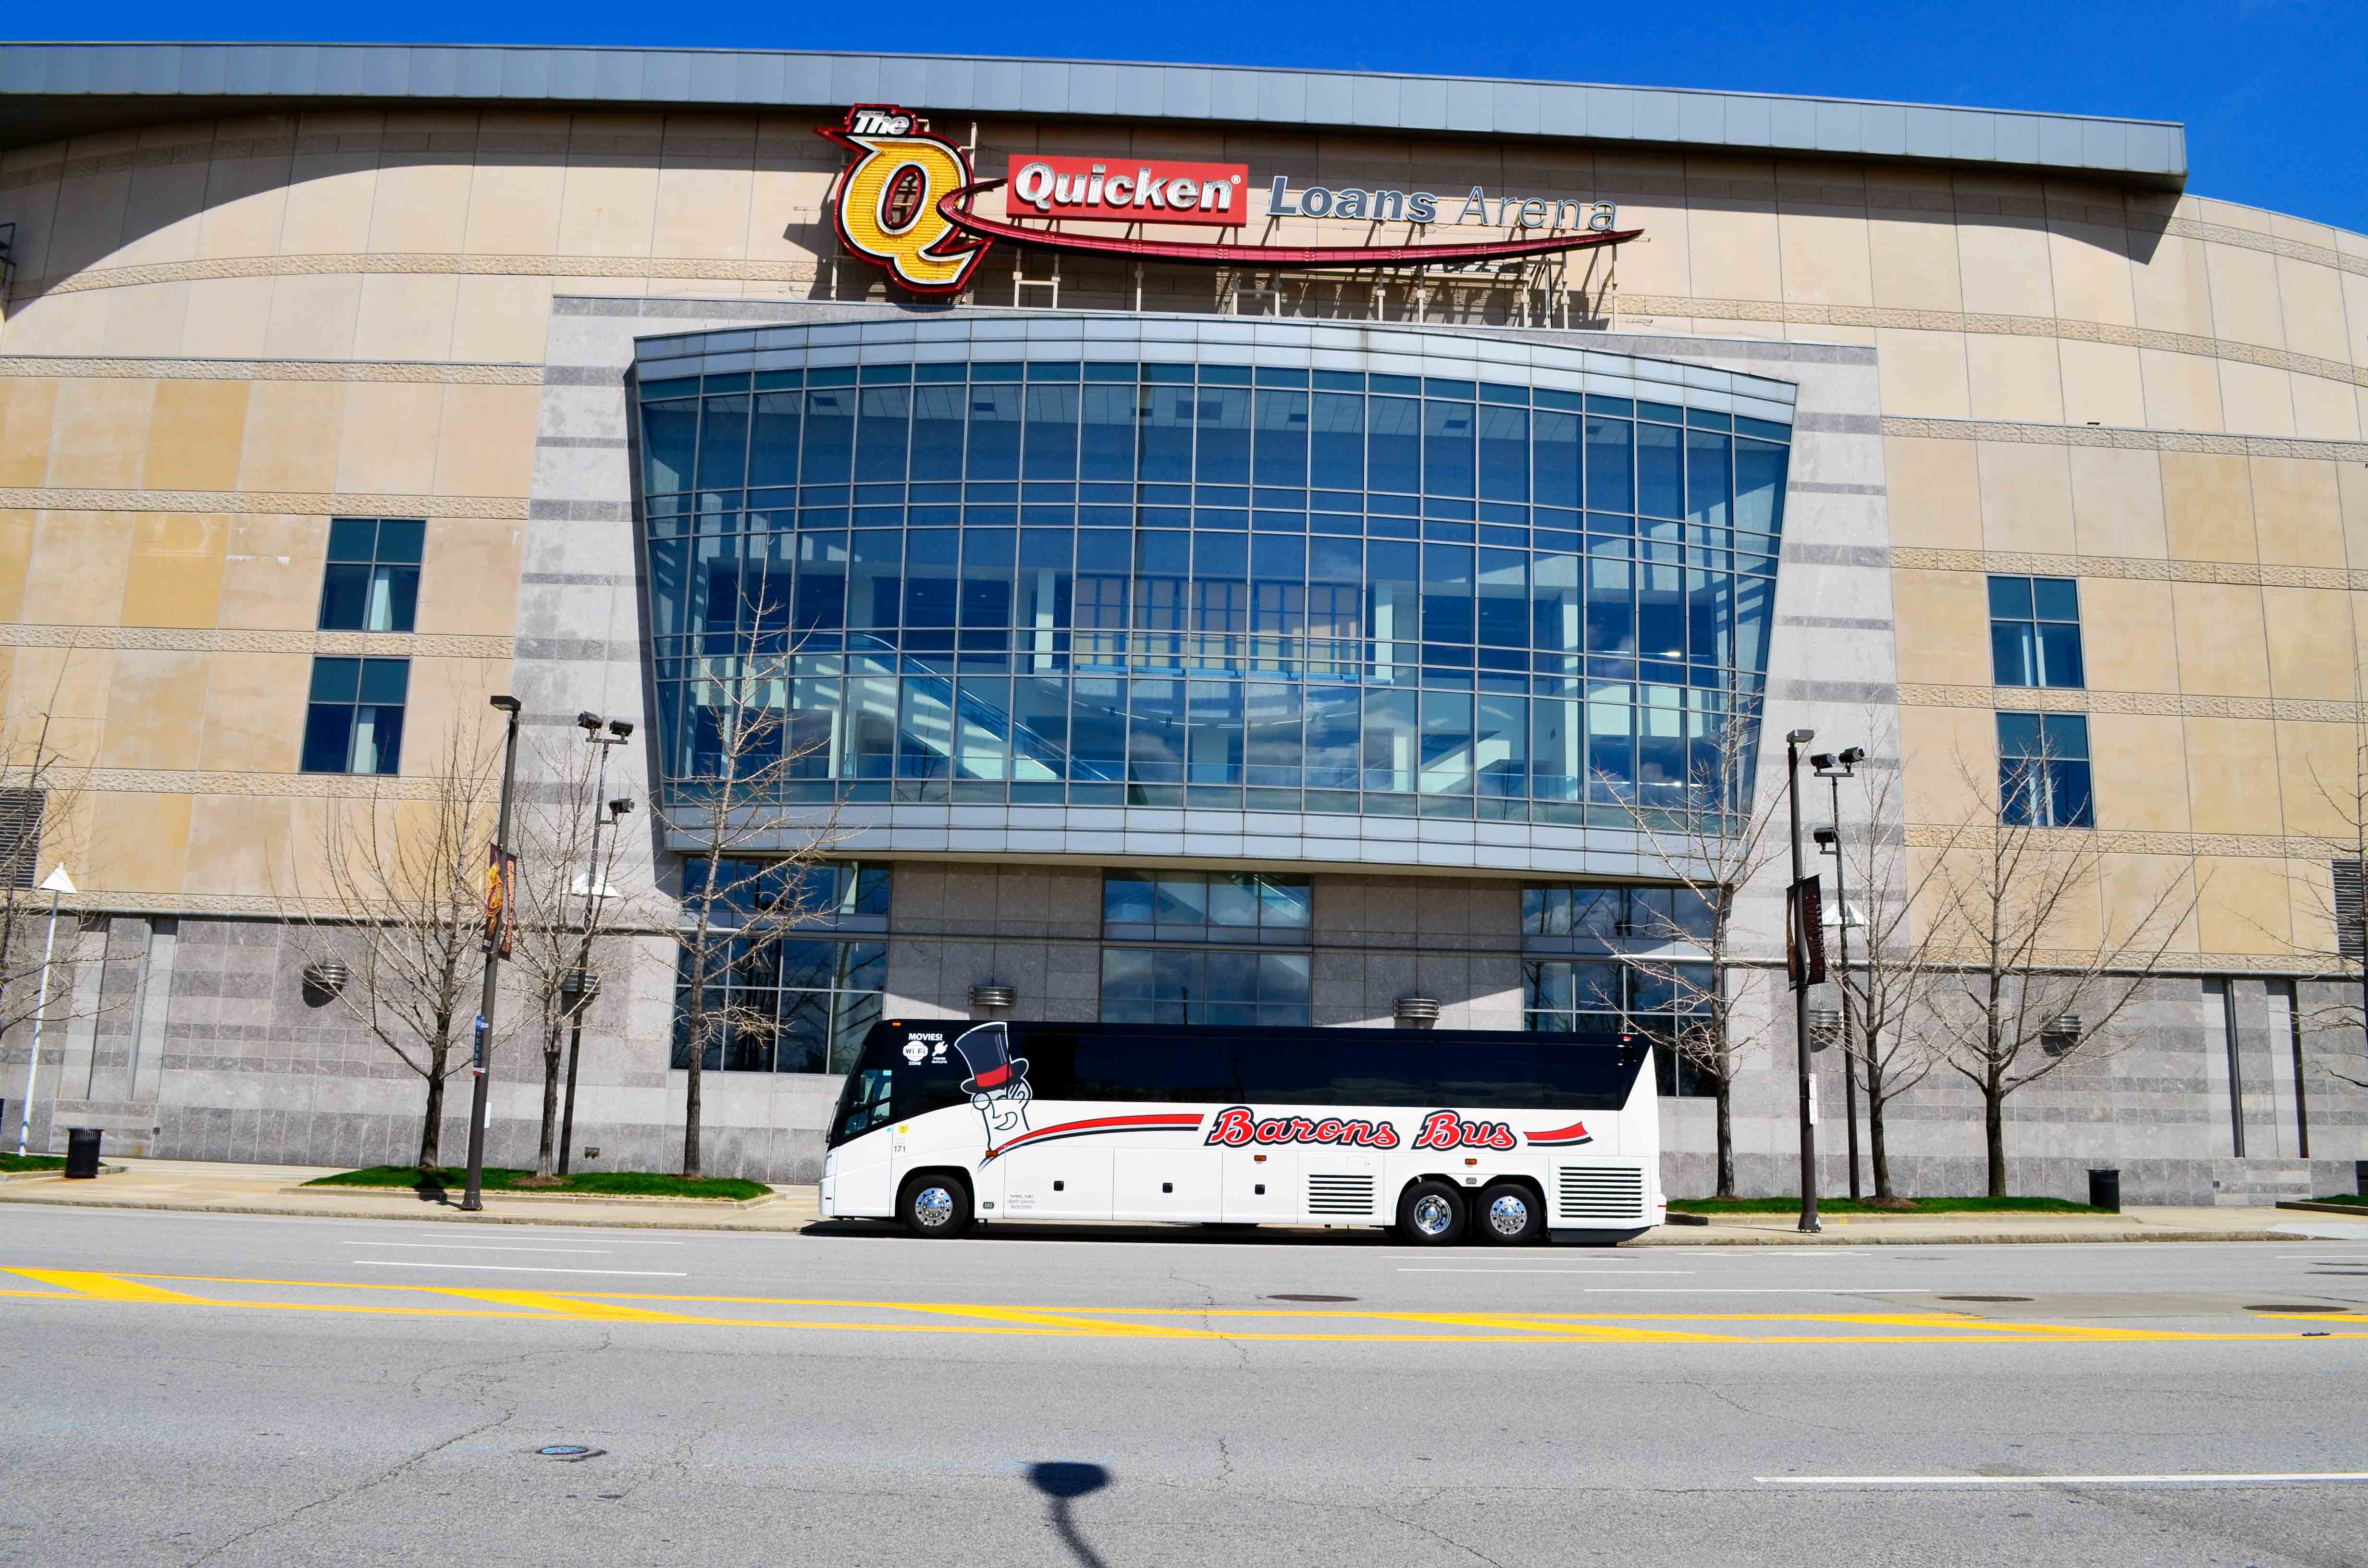 barons bus in front of quicken loans arena